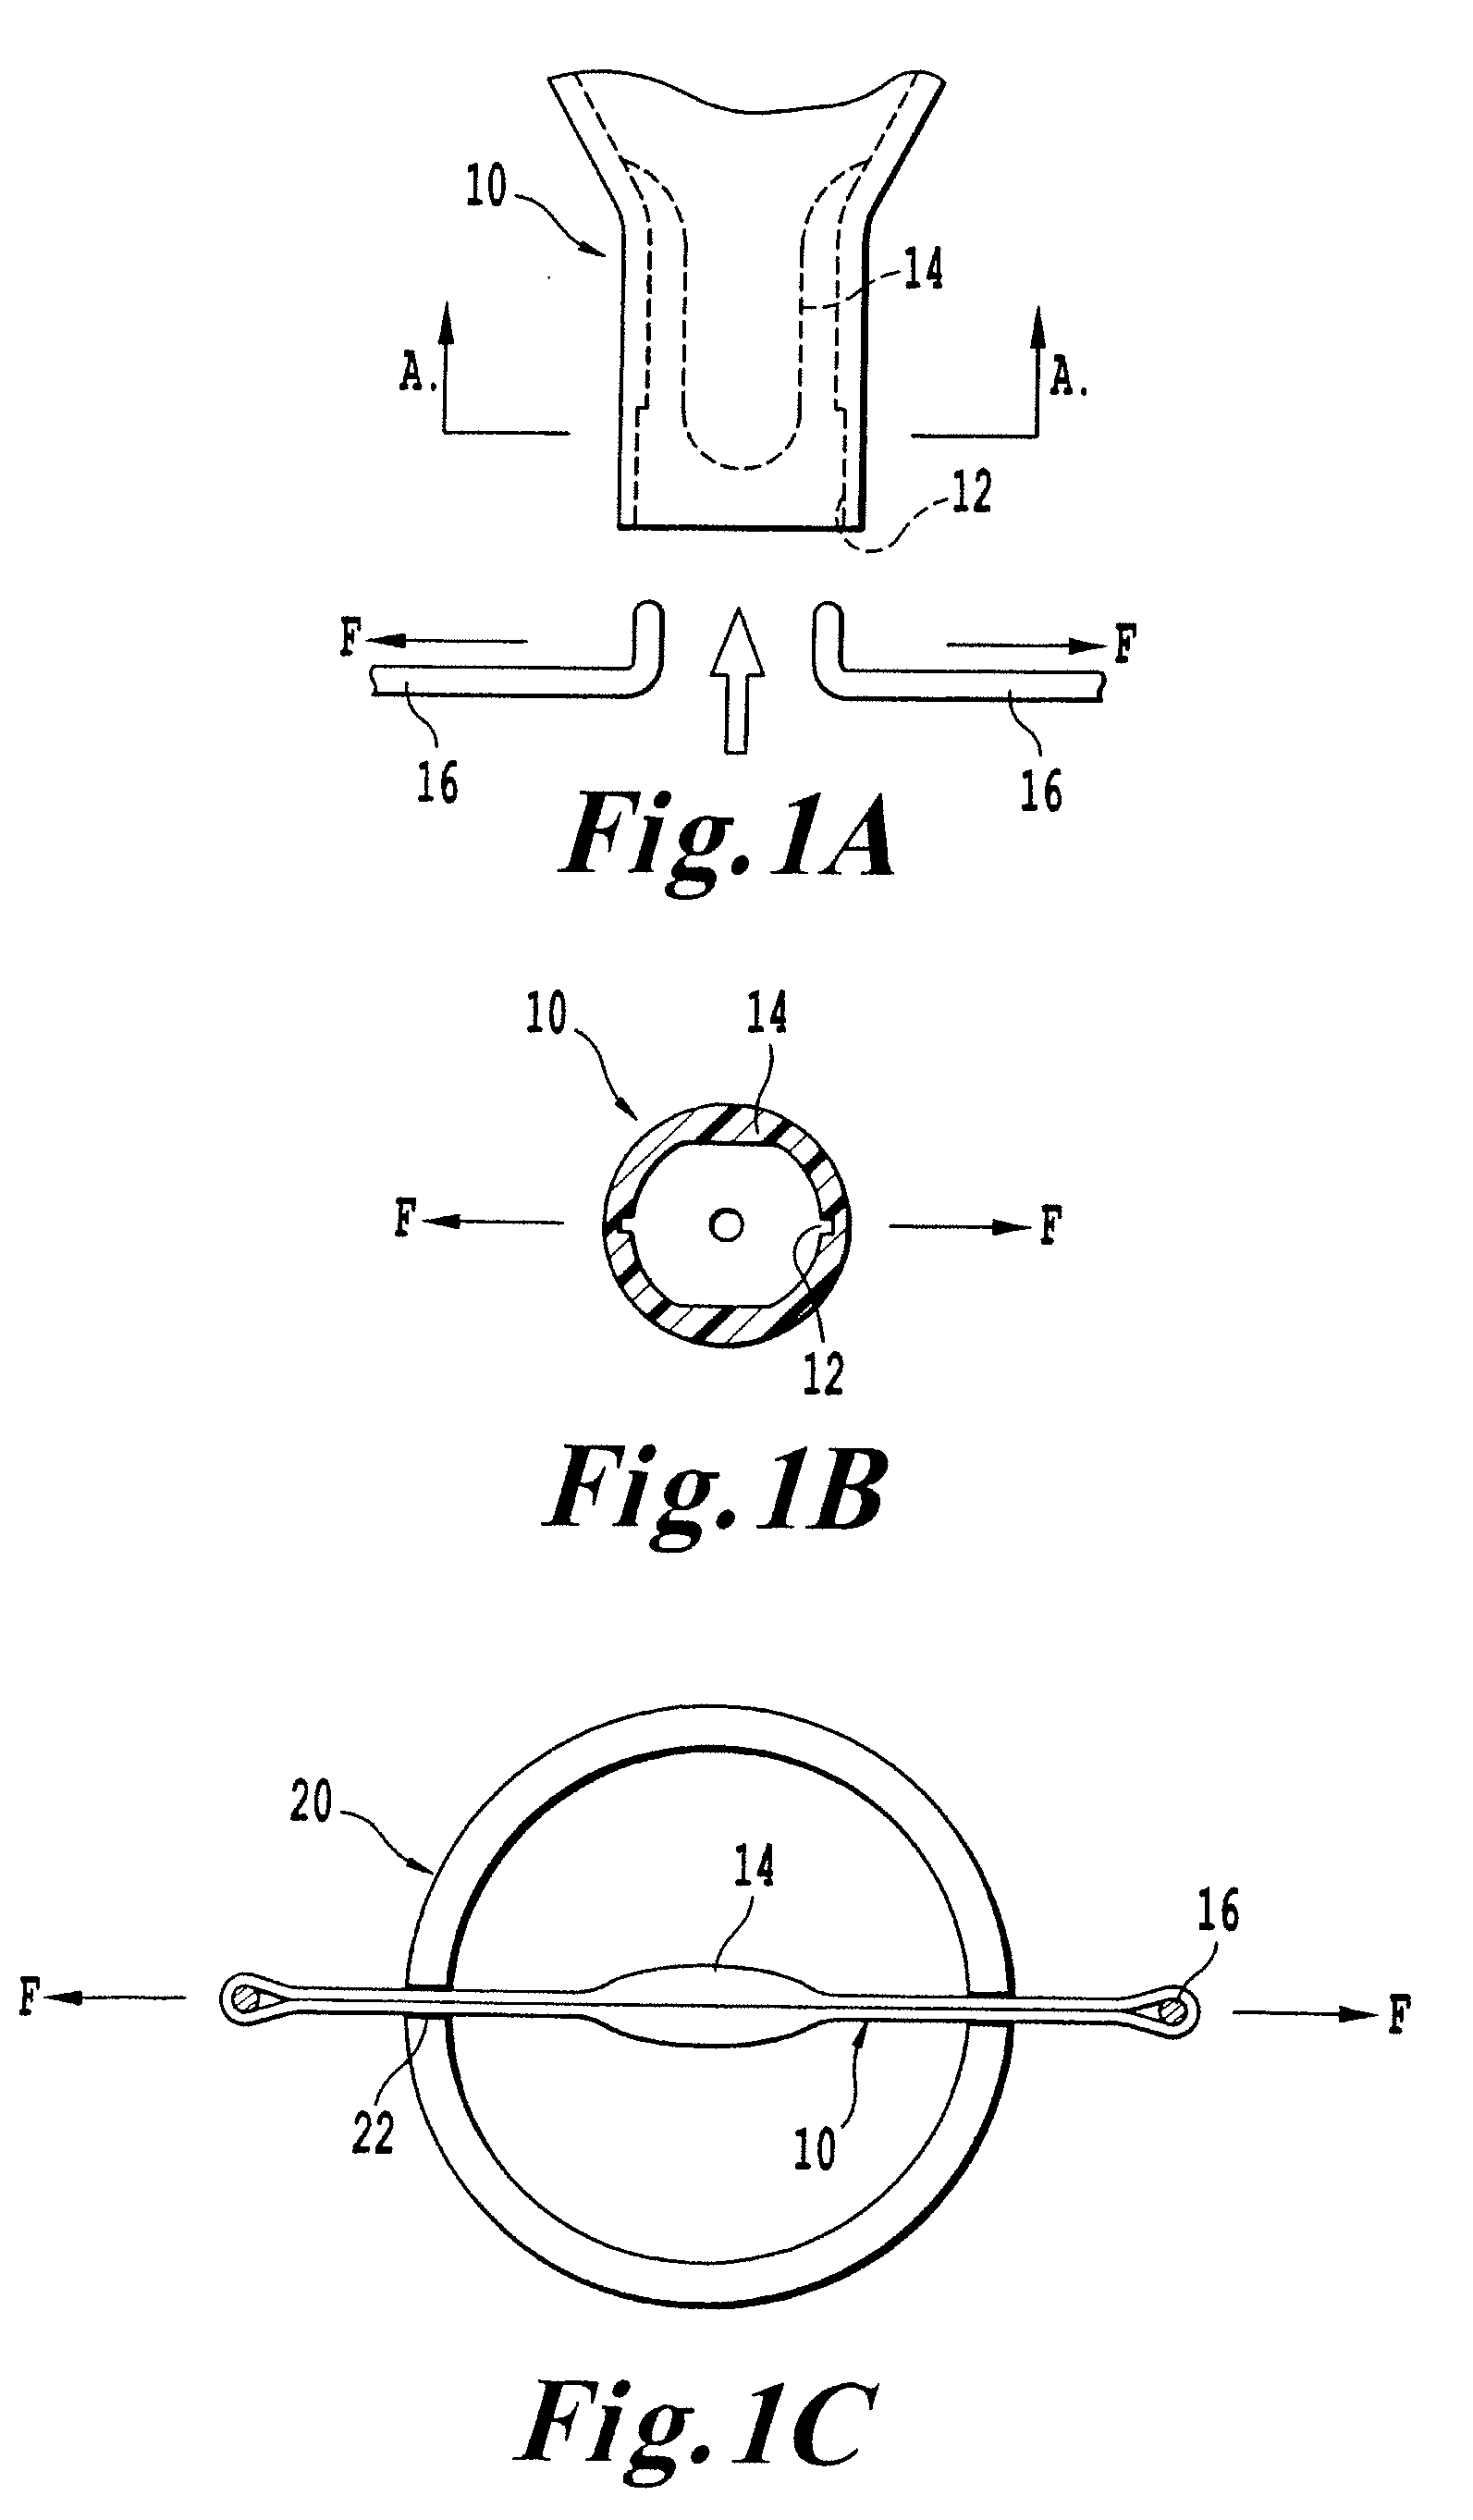 Double-cone sphincter introducer assembly and integrated valve assembly